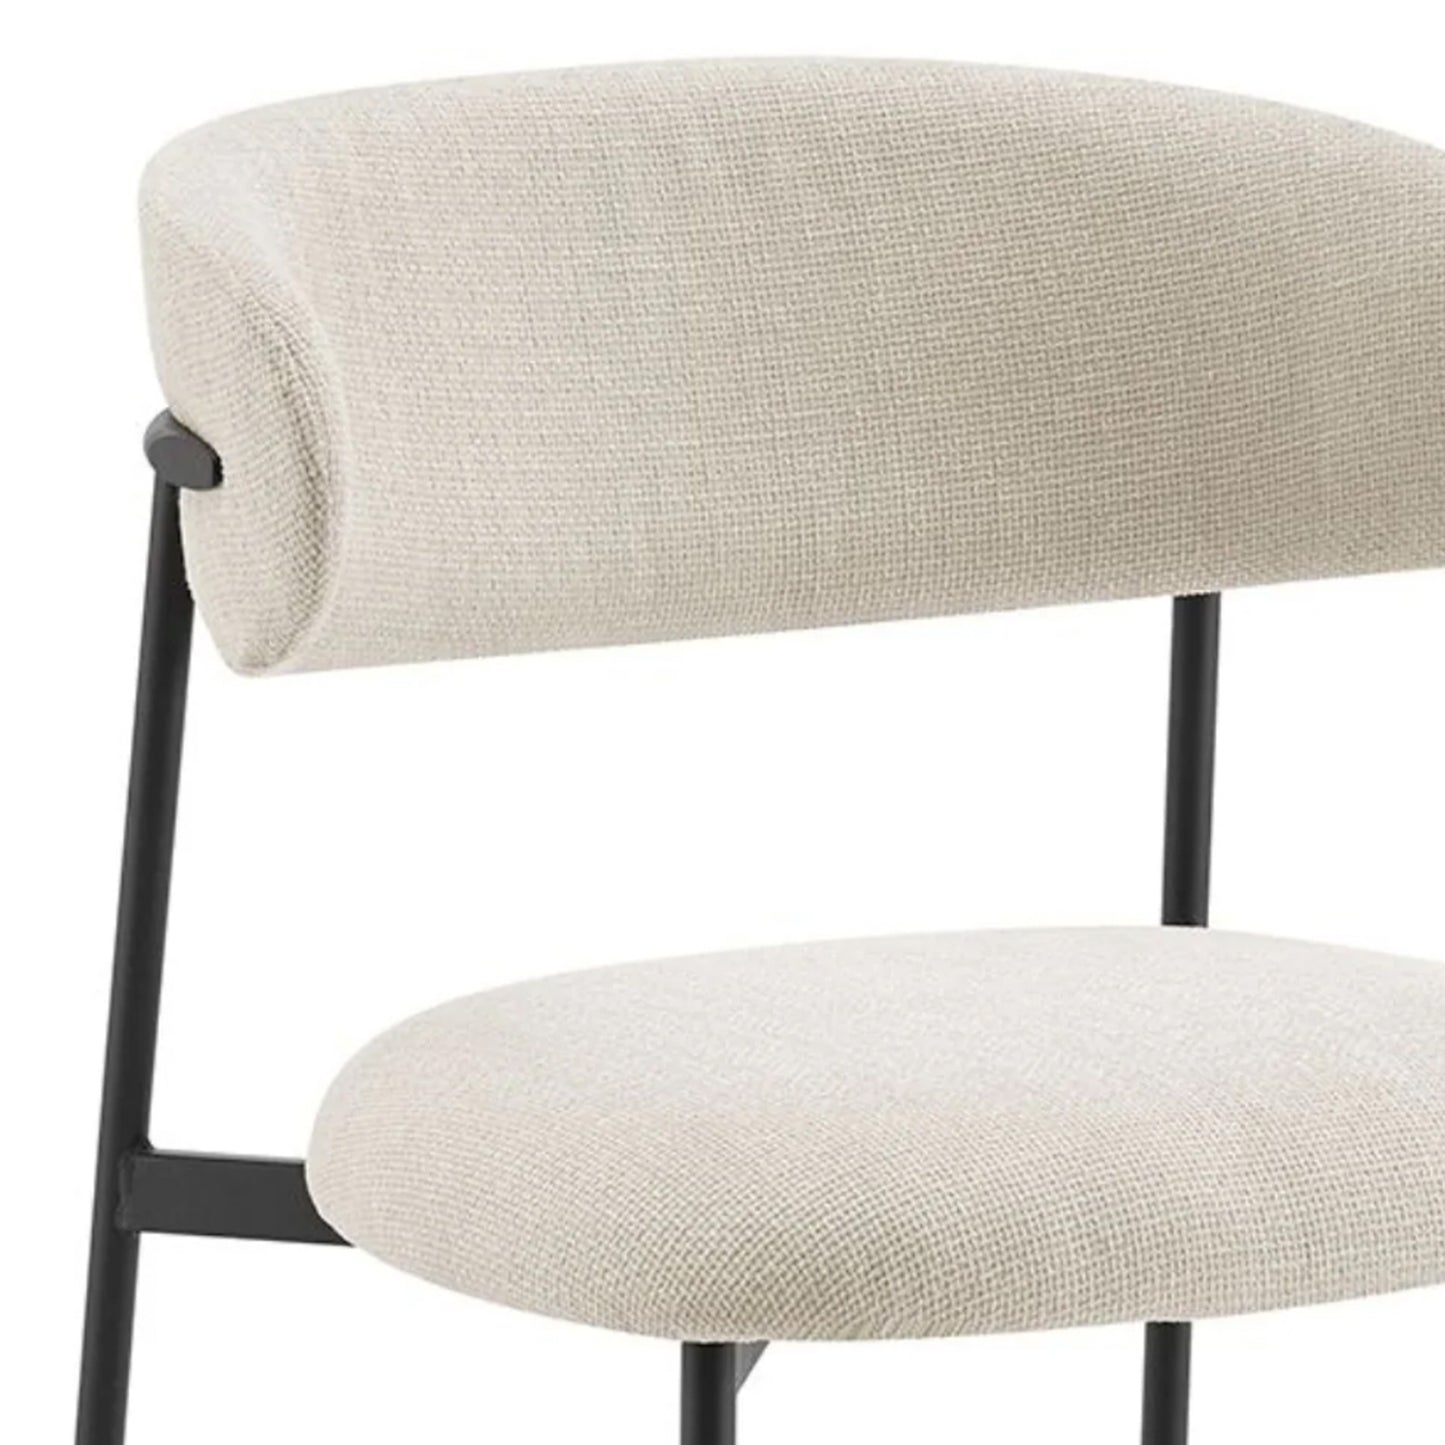 Cream Linen Dining Chair with Black Frame